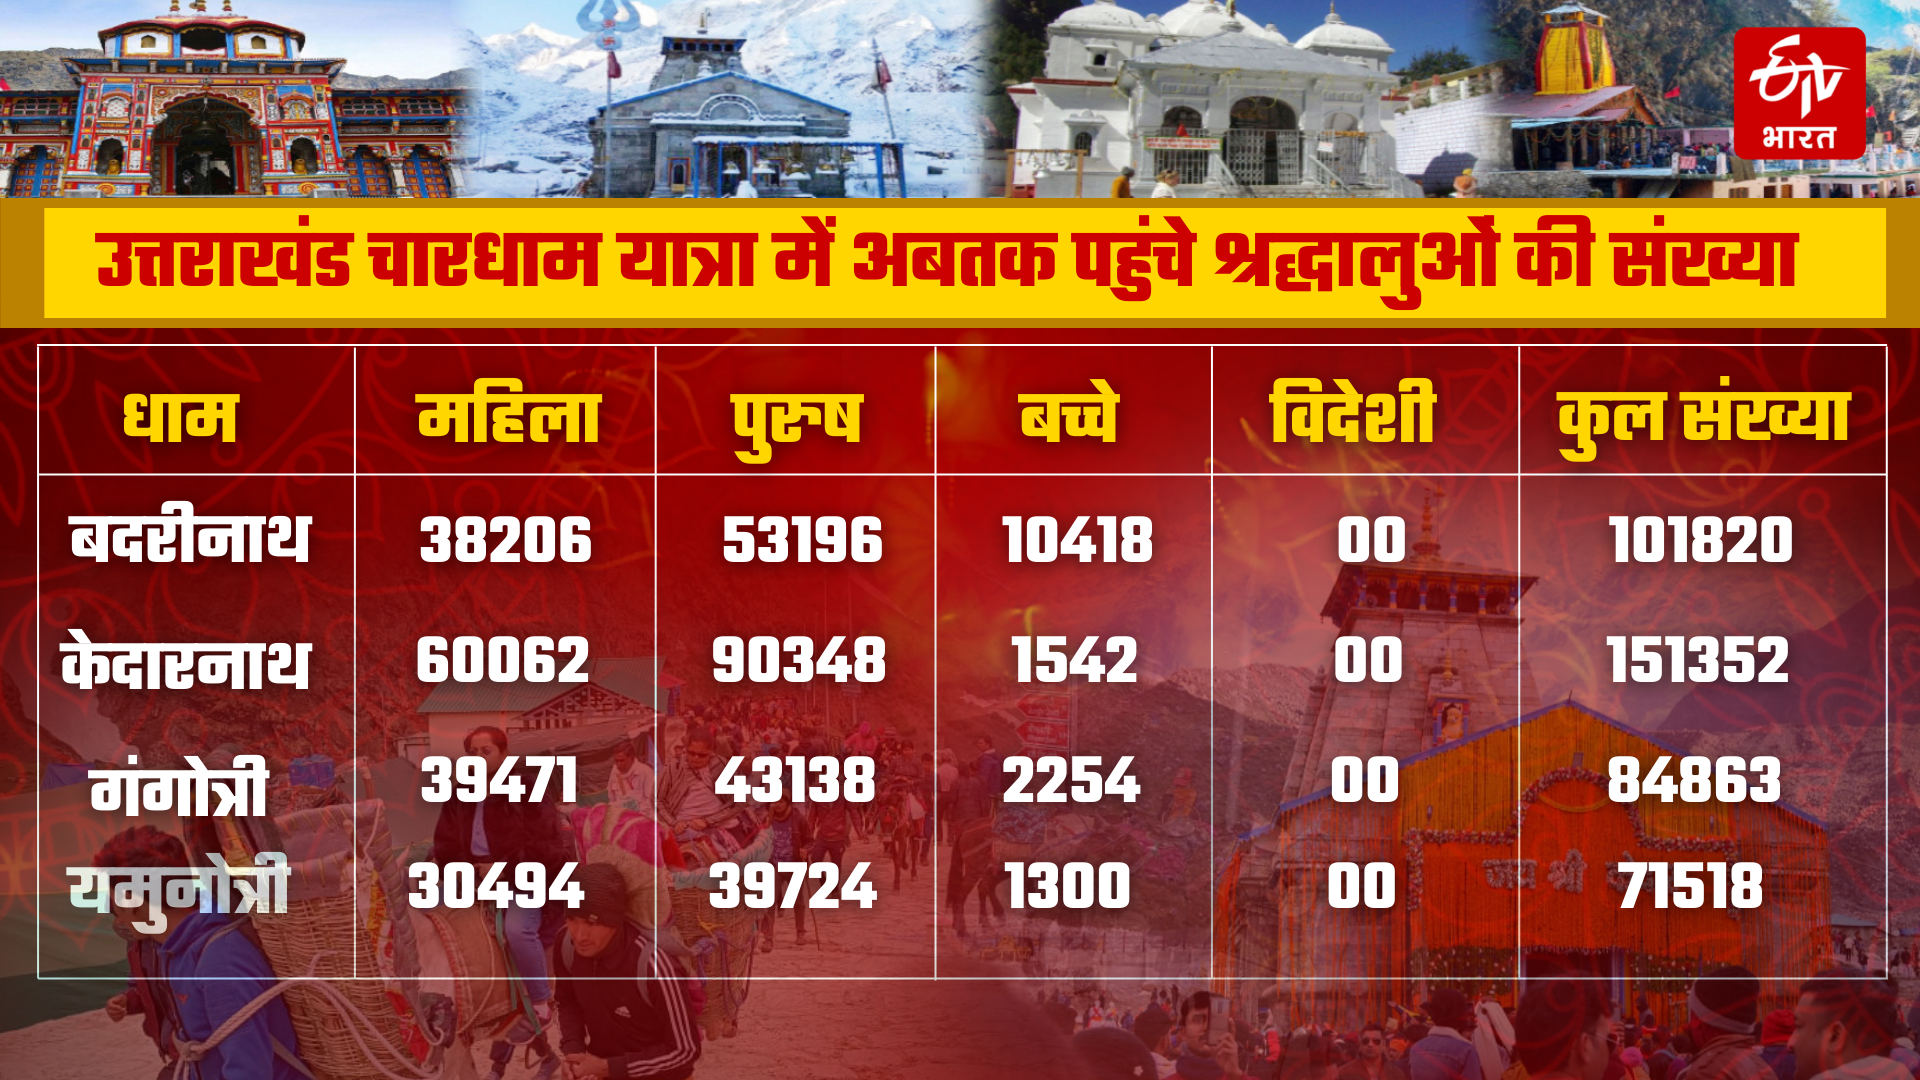 Chardham pilgrims will not get entry without registration